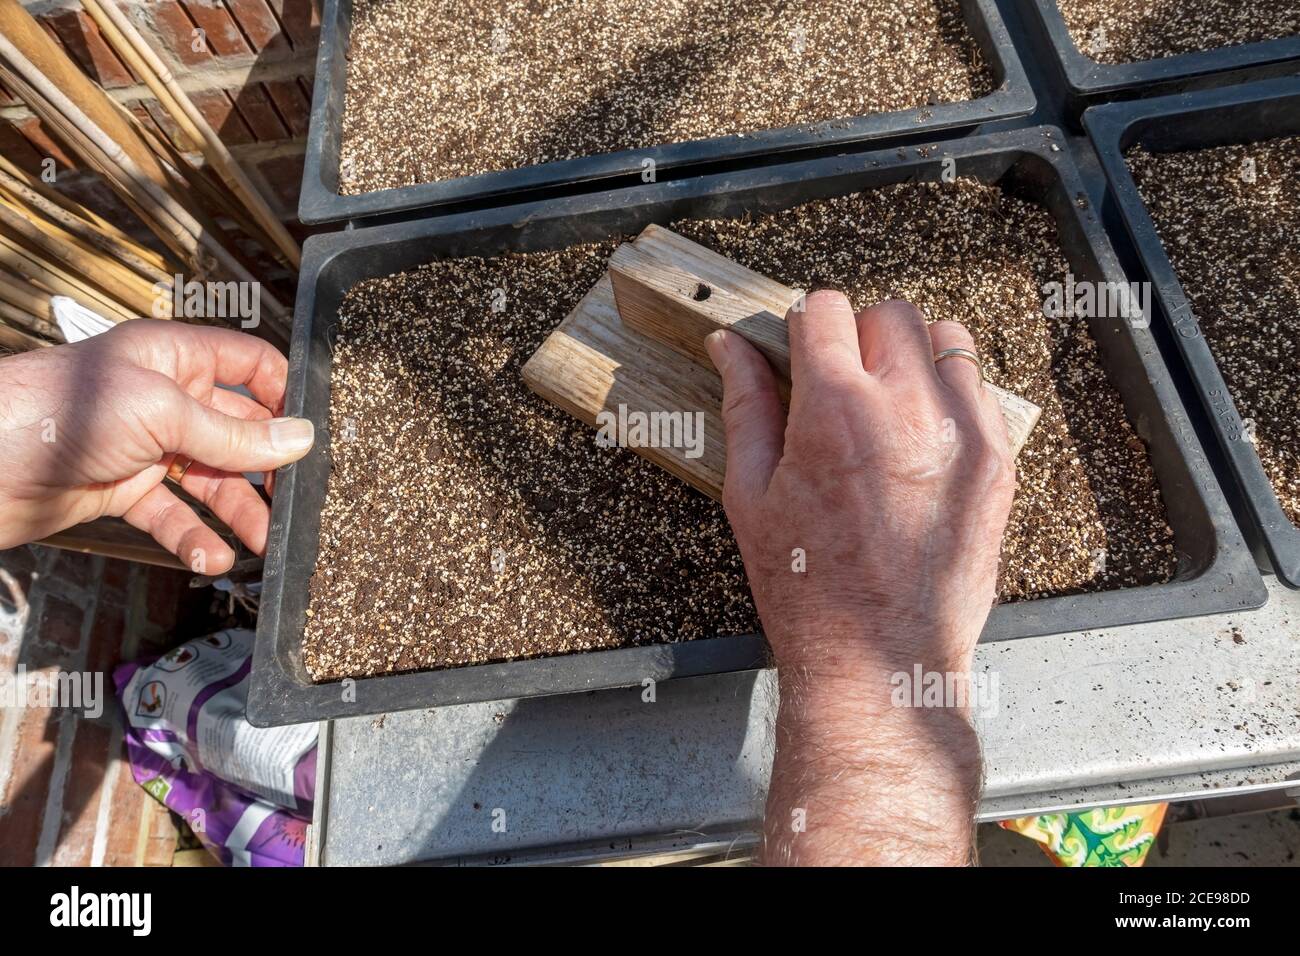 Close up of man levelling potting compost in a seed tray ready for sowing seeds in spring. Stock Photo